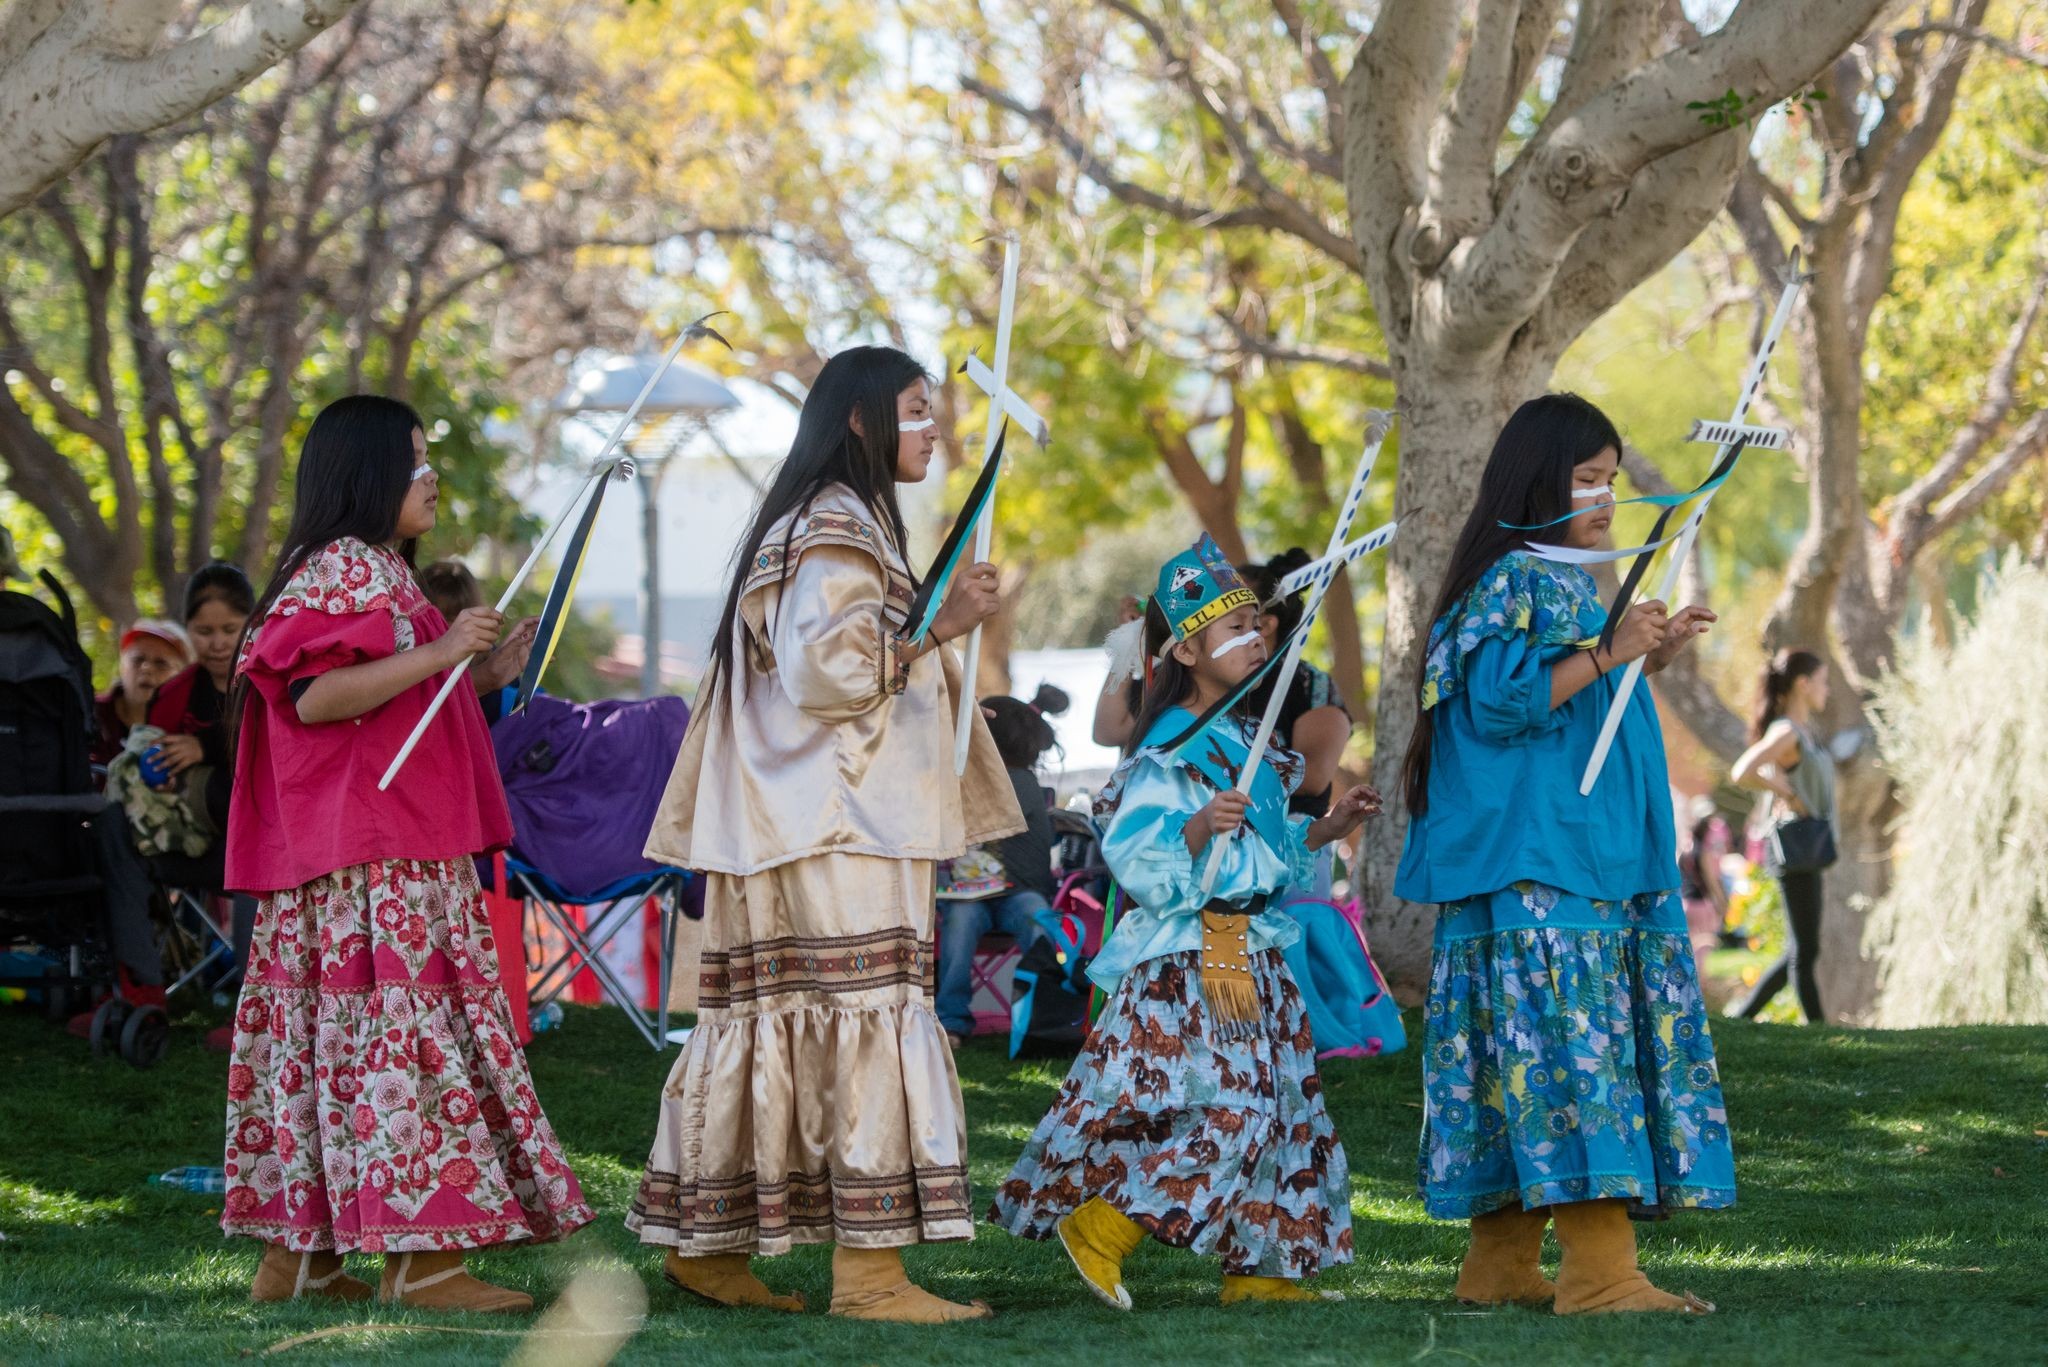 See the Diversity of Native Tribes This Weekend at the Arizona Indian